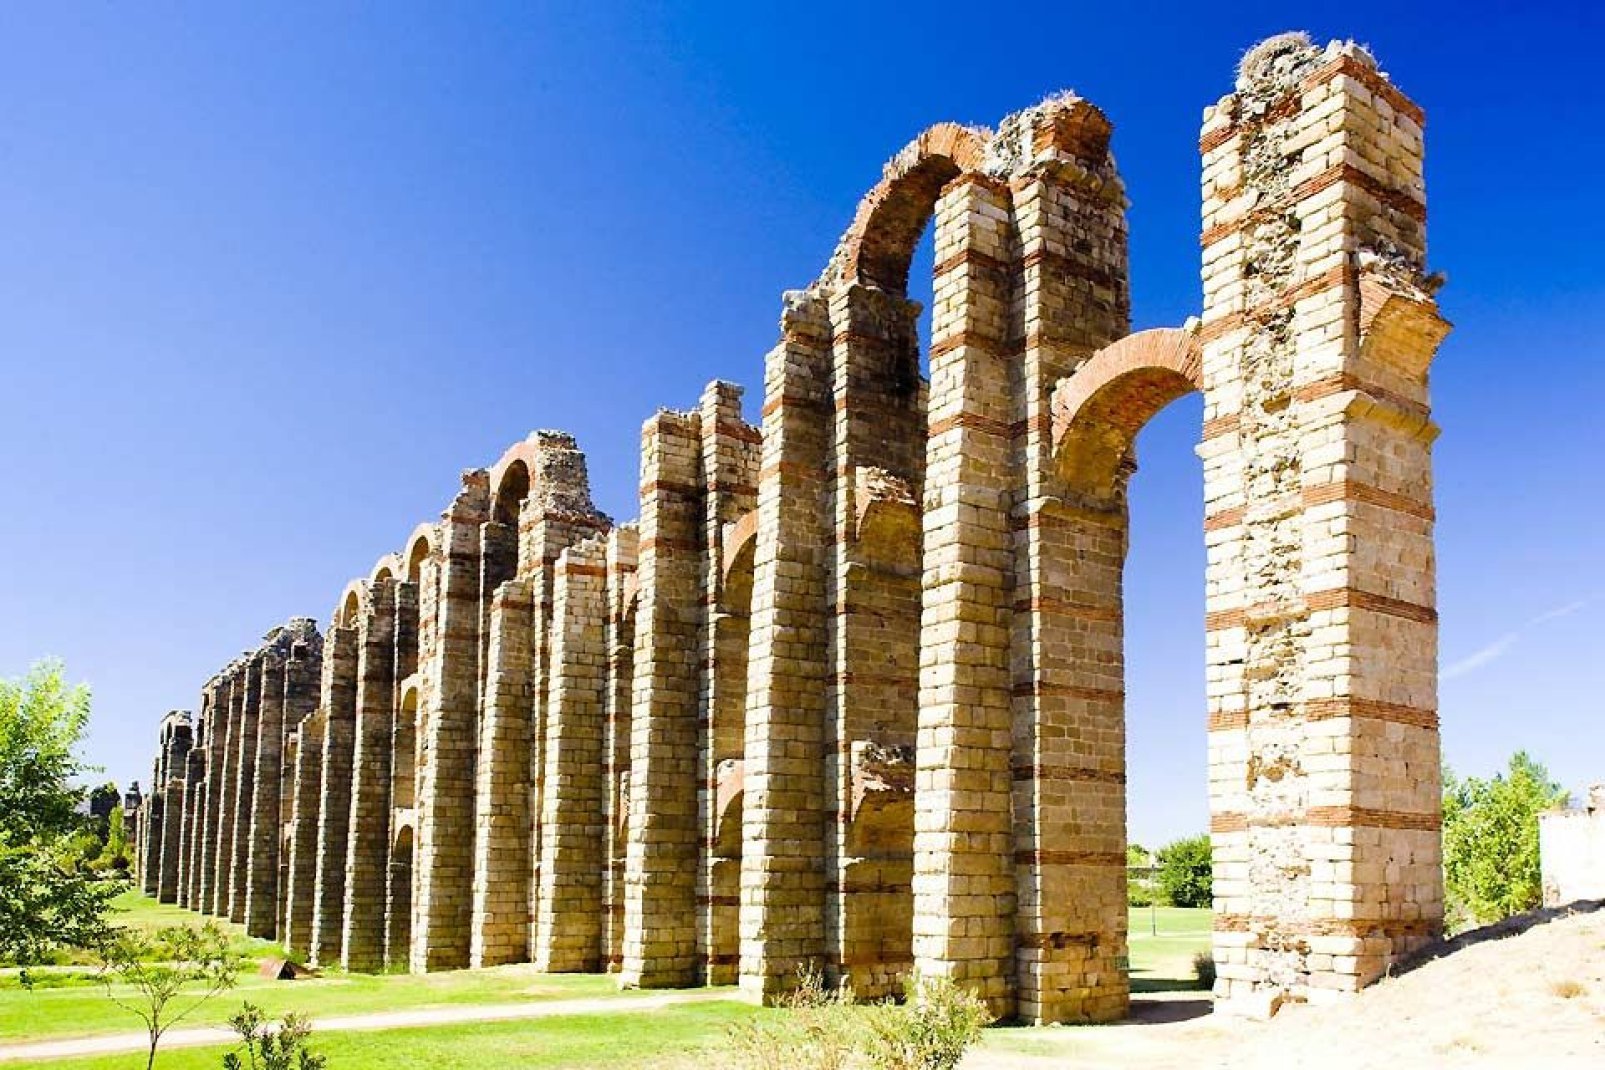 This aqueduct was built in the Albarregas valley in Roman times. It stands 25 metres high.